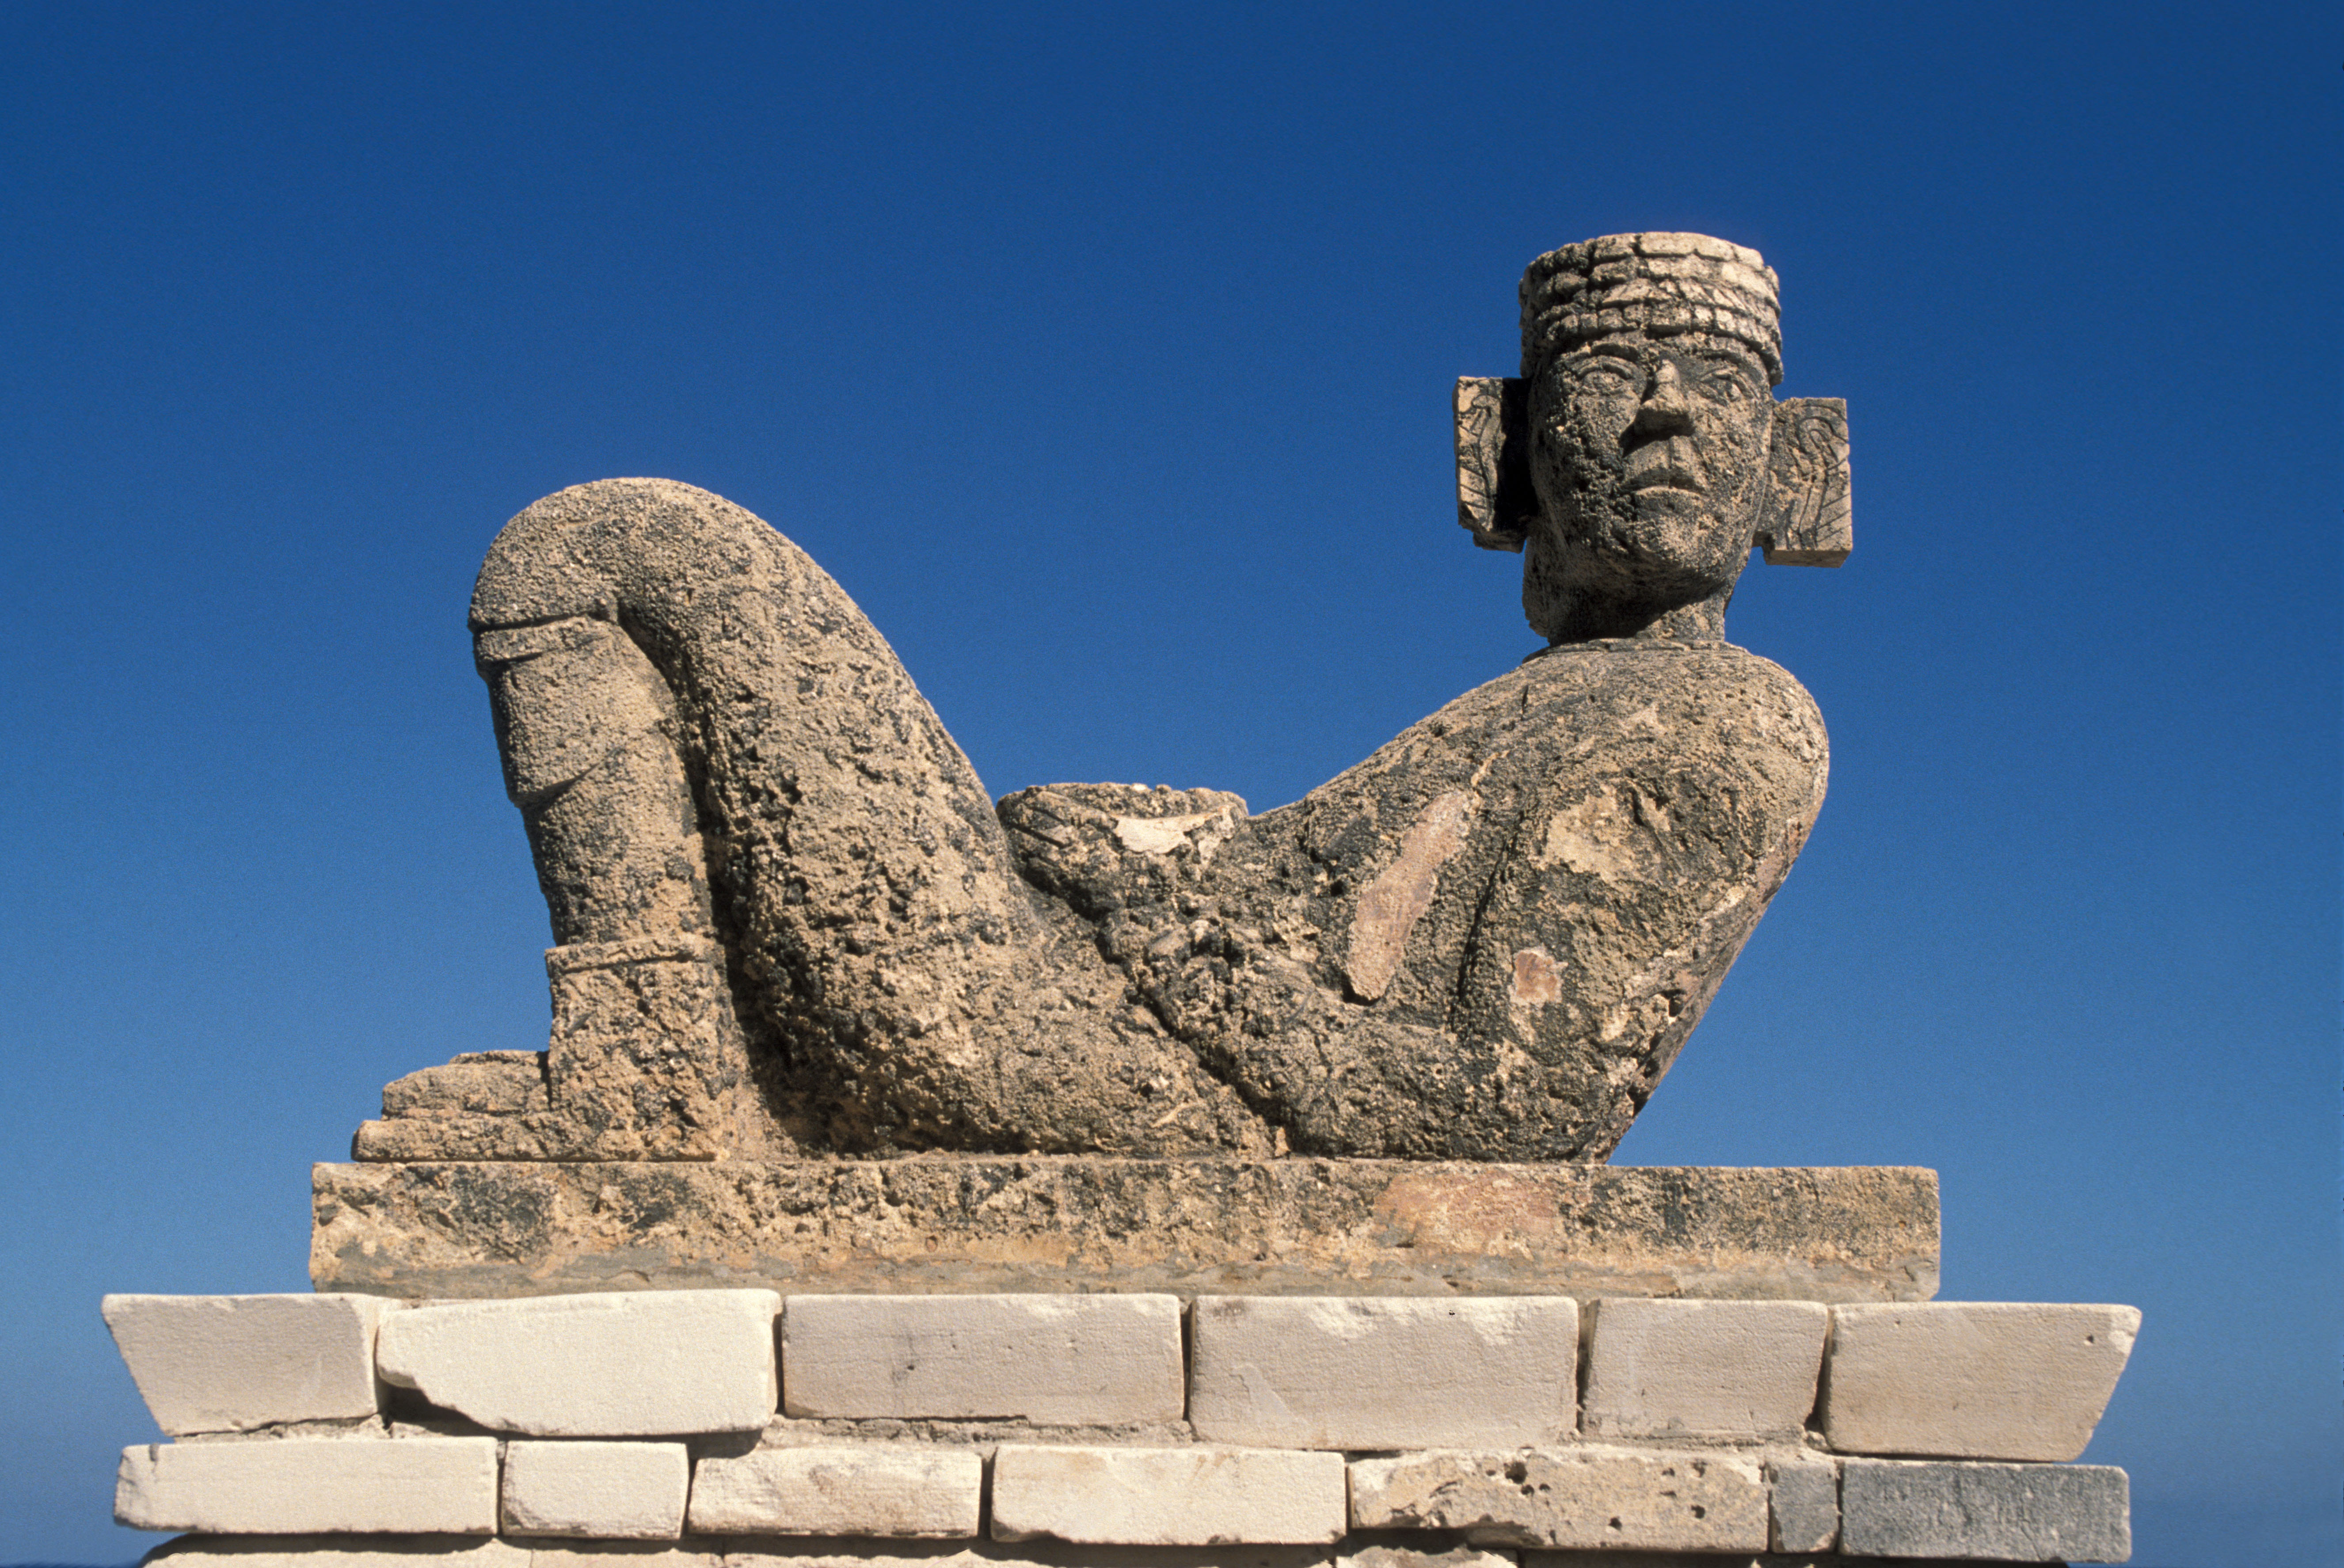 A chacmool sculpture in Mexico